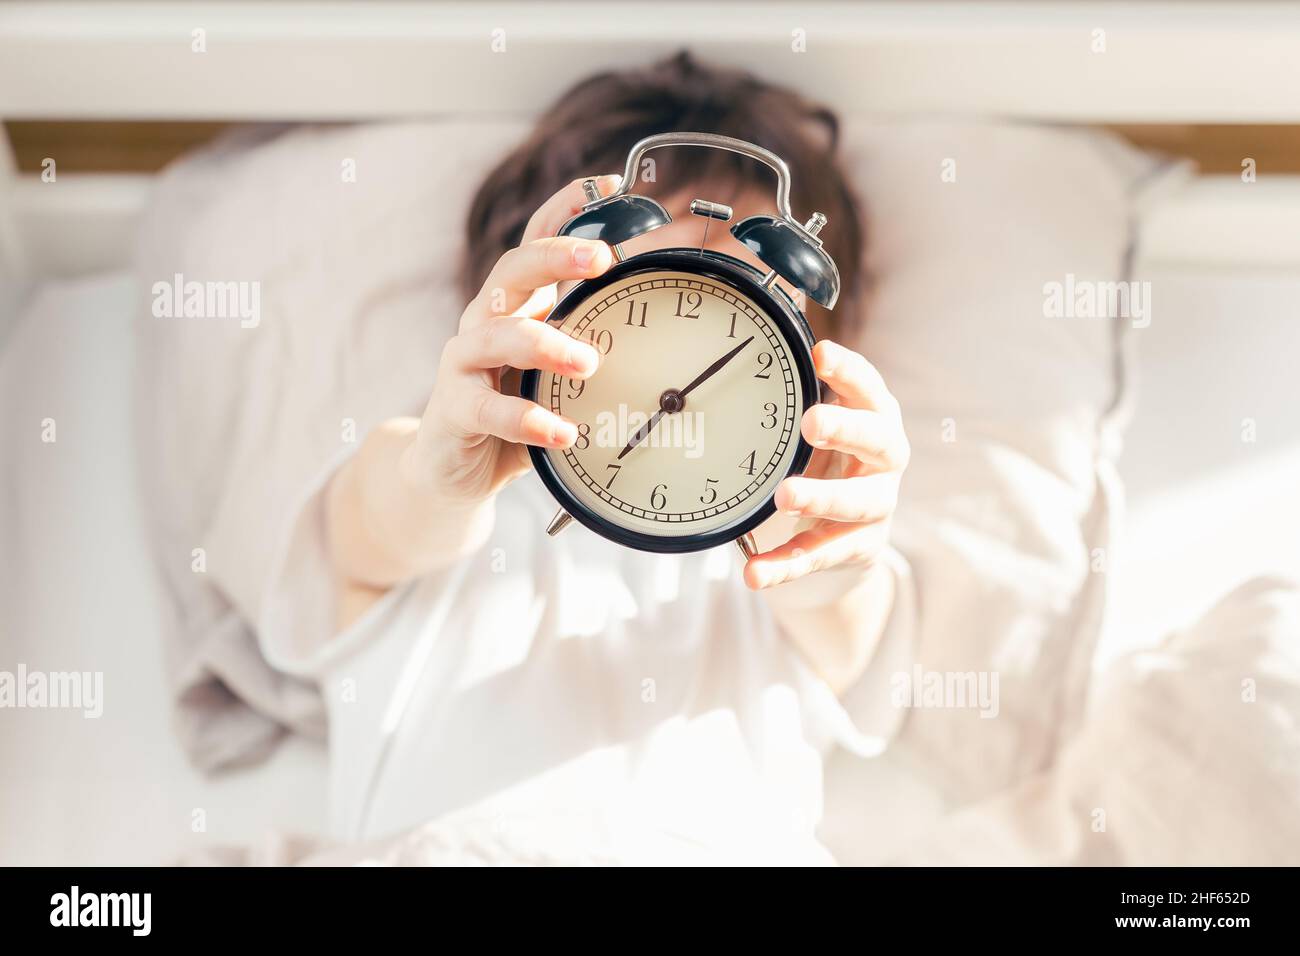 Unrecognizable kid lying in bed and holding a retro style alarm clock. Time to get up in the morning. Focus on the clock Stock Photo